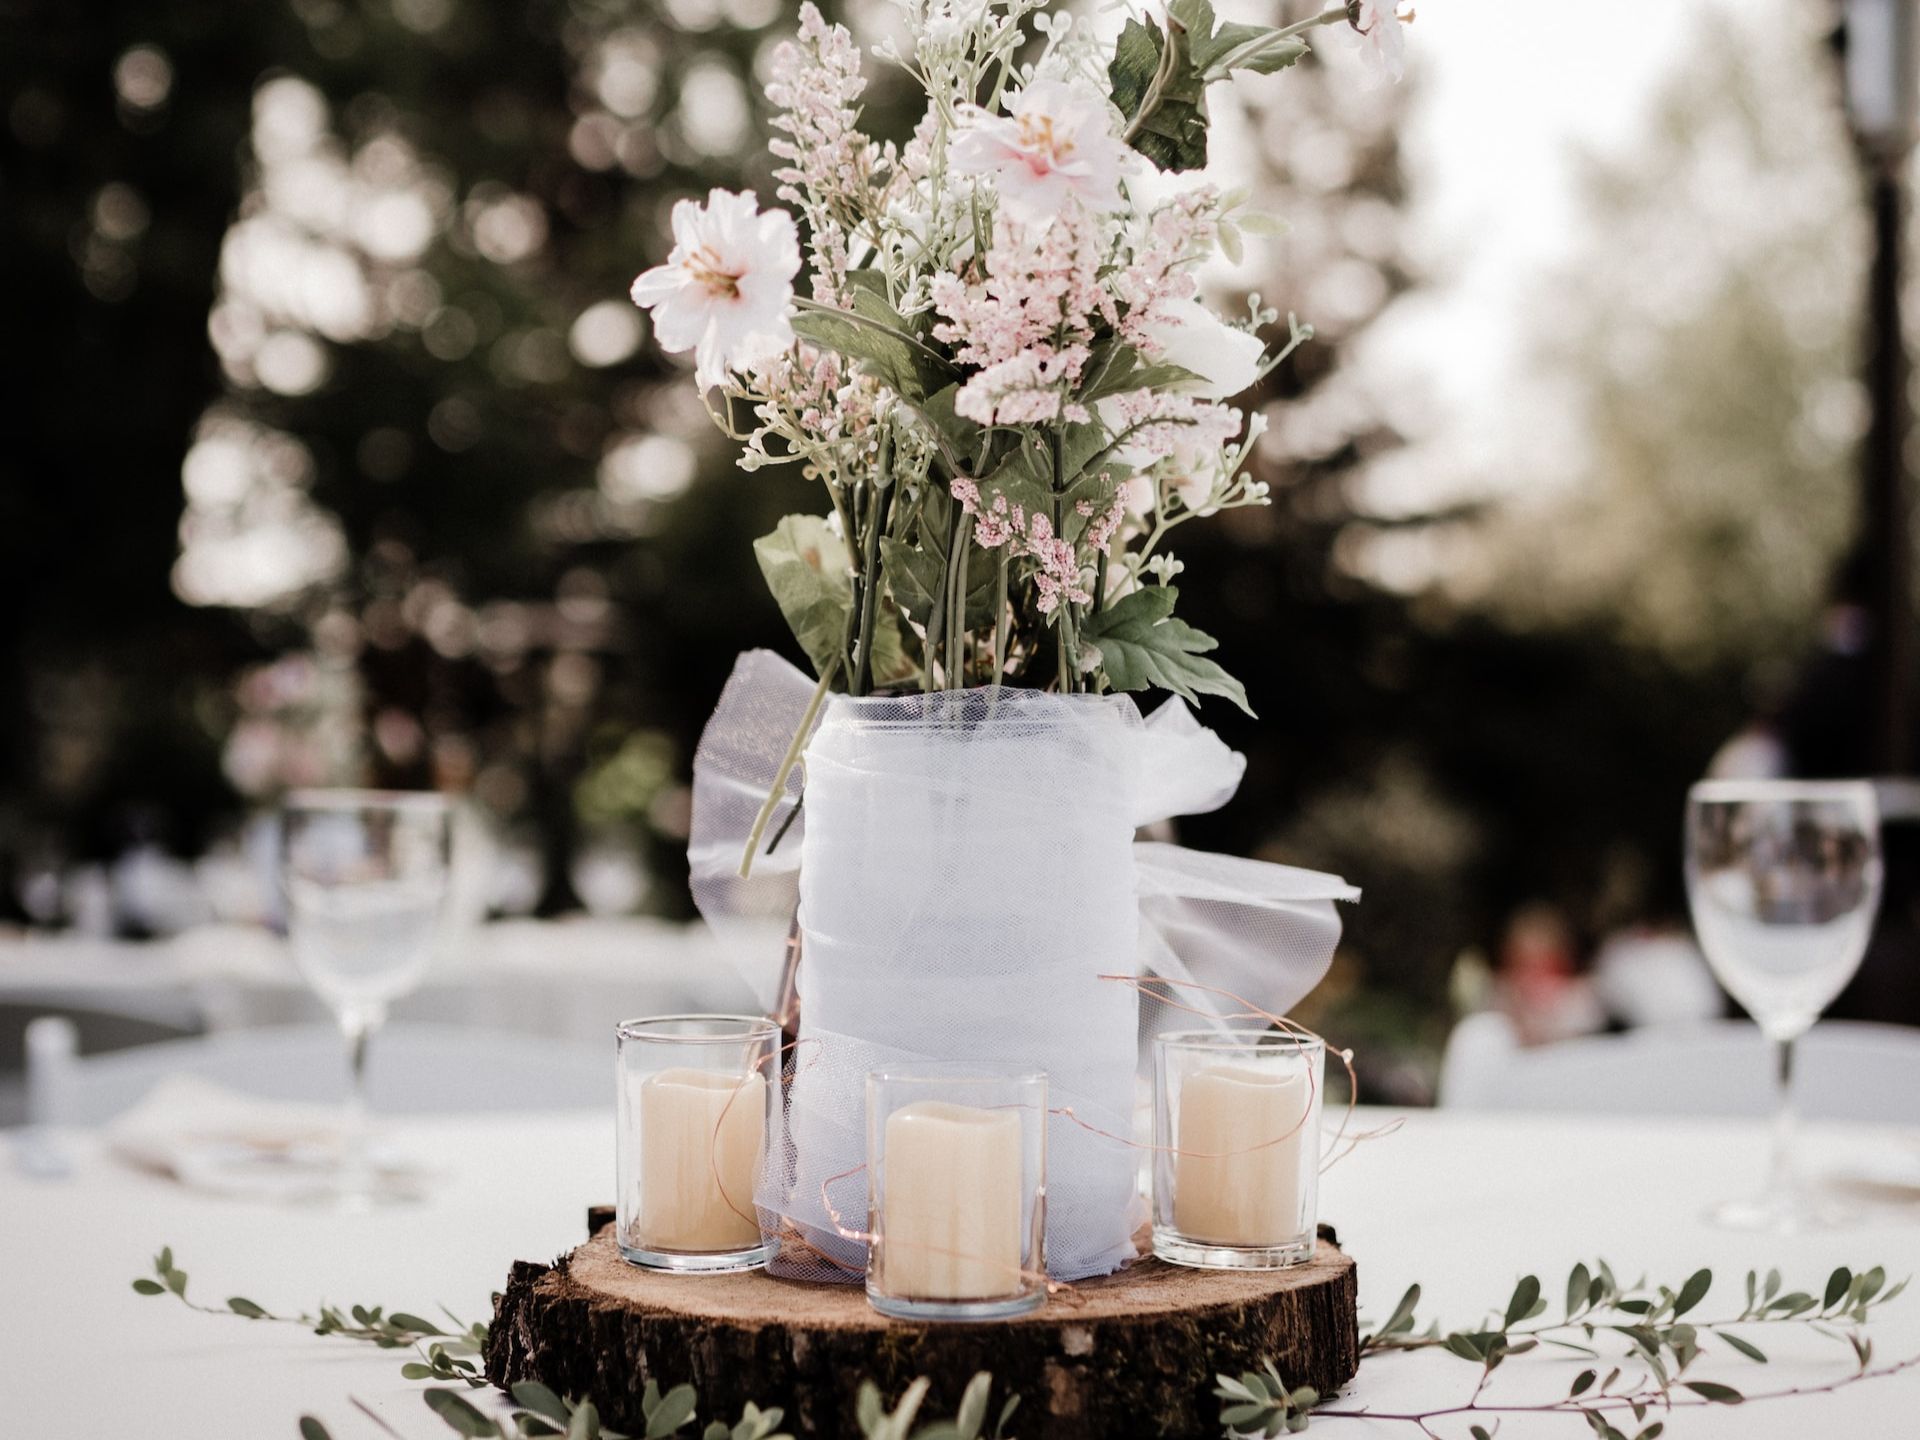 A wedding table with a white flower centerpiece.